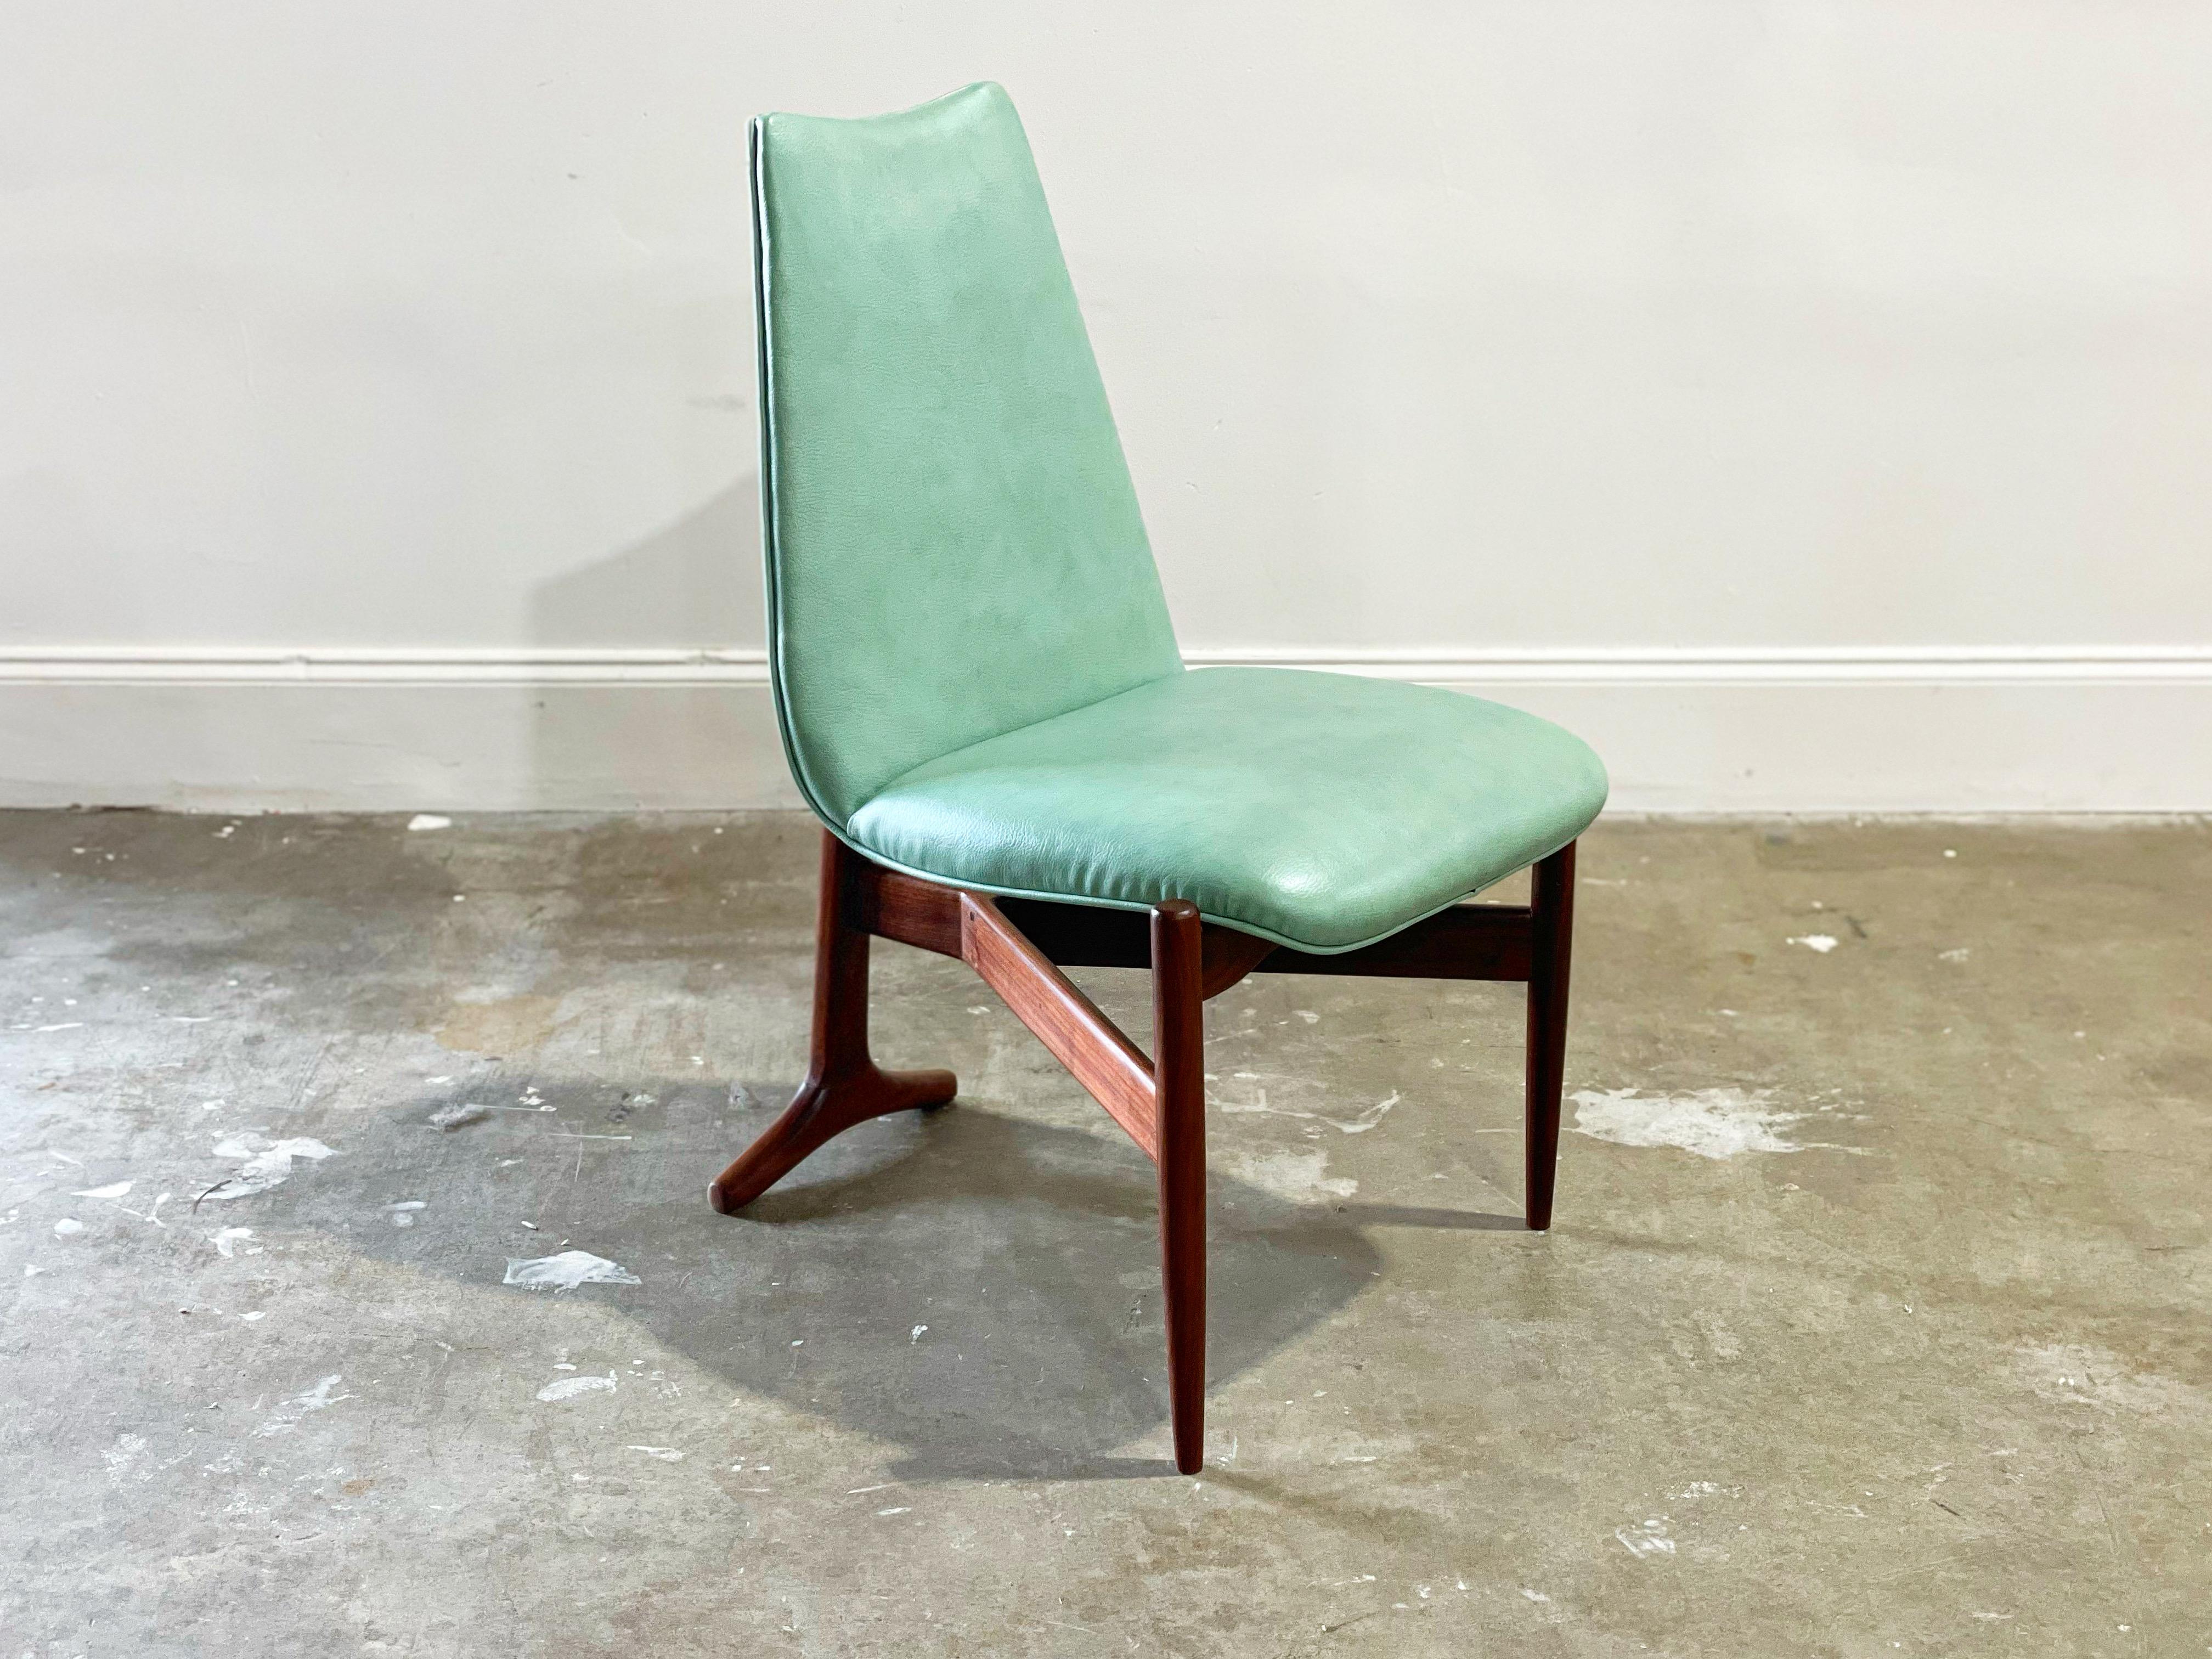 Striking solid walnut floating occasional chair designed by Seymour James Weiner for Kodawood, Miami circa 1964. 
Solid American black walnut frames have been fully restored and are in excellent condition. Original sea foam green naugahyde was deep